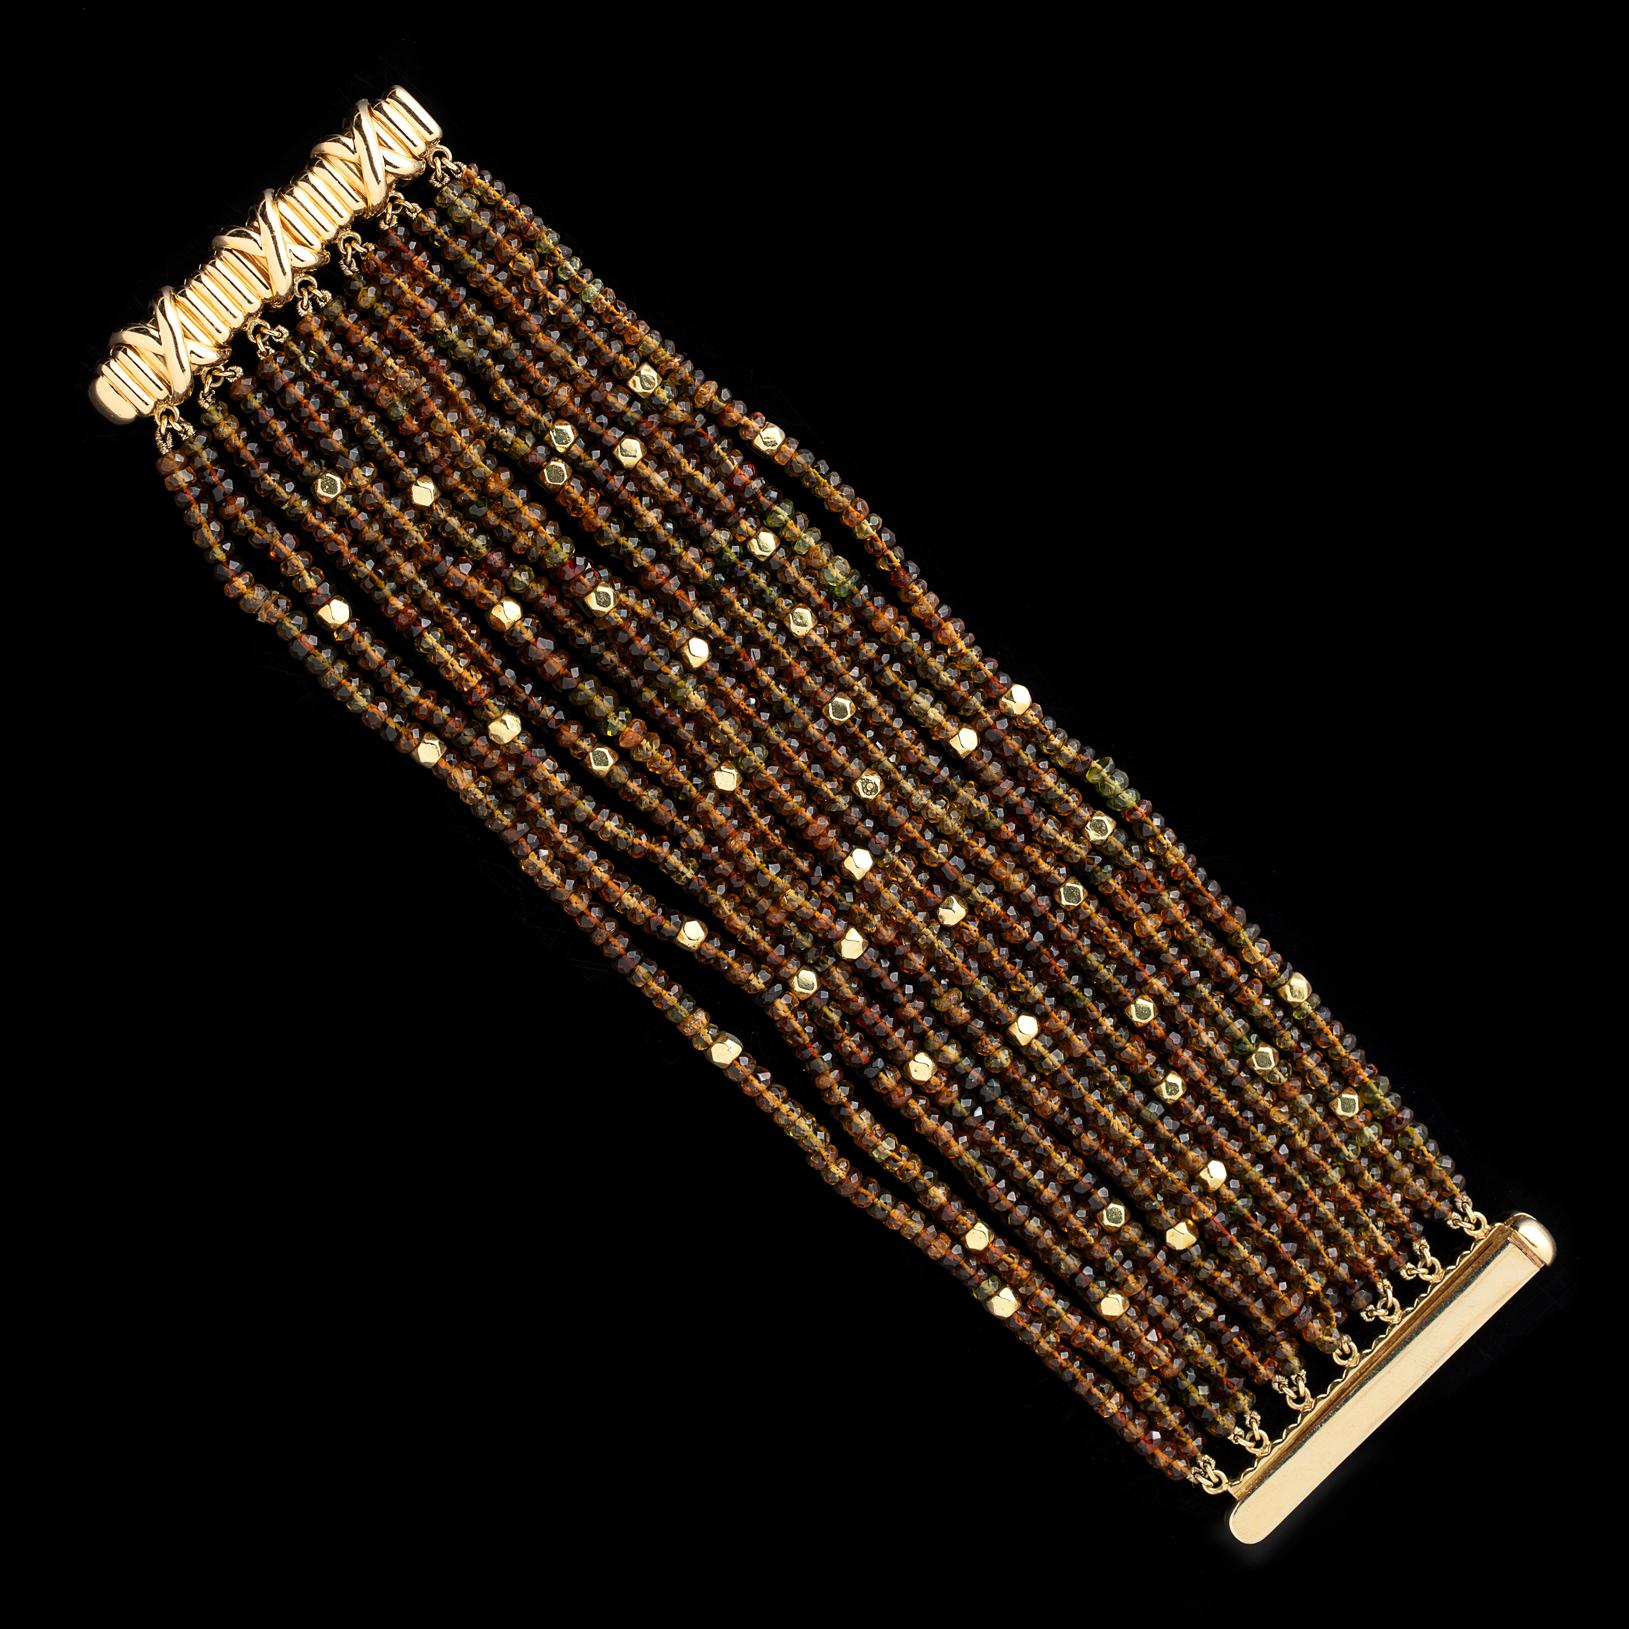 Circa 2000, the wide Verdura 18k yellow gold bracelet is designed with 14 rows of faceted roundel citrine and peridot beads, and further accented with gold faceted beads. The bracelet measures 7 1/4 inch in length, is 2 inches wide, and is